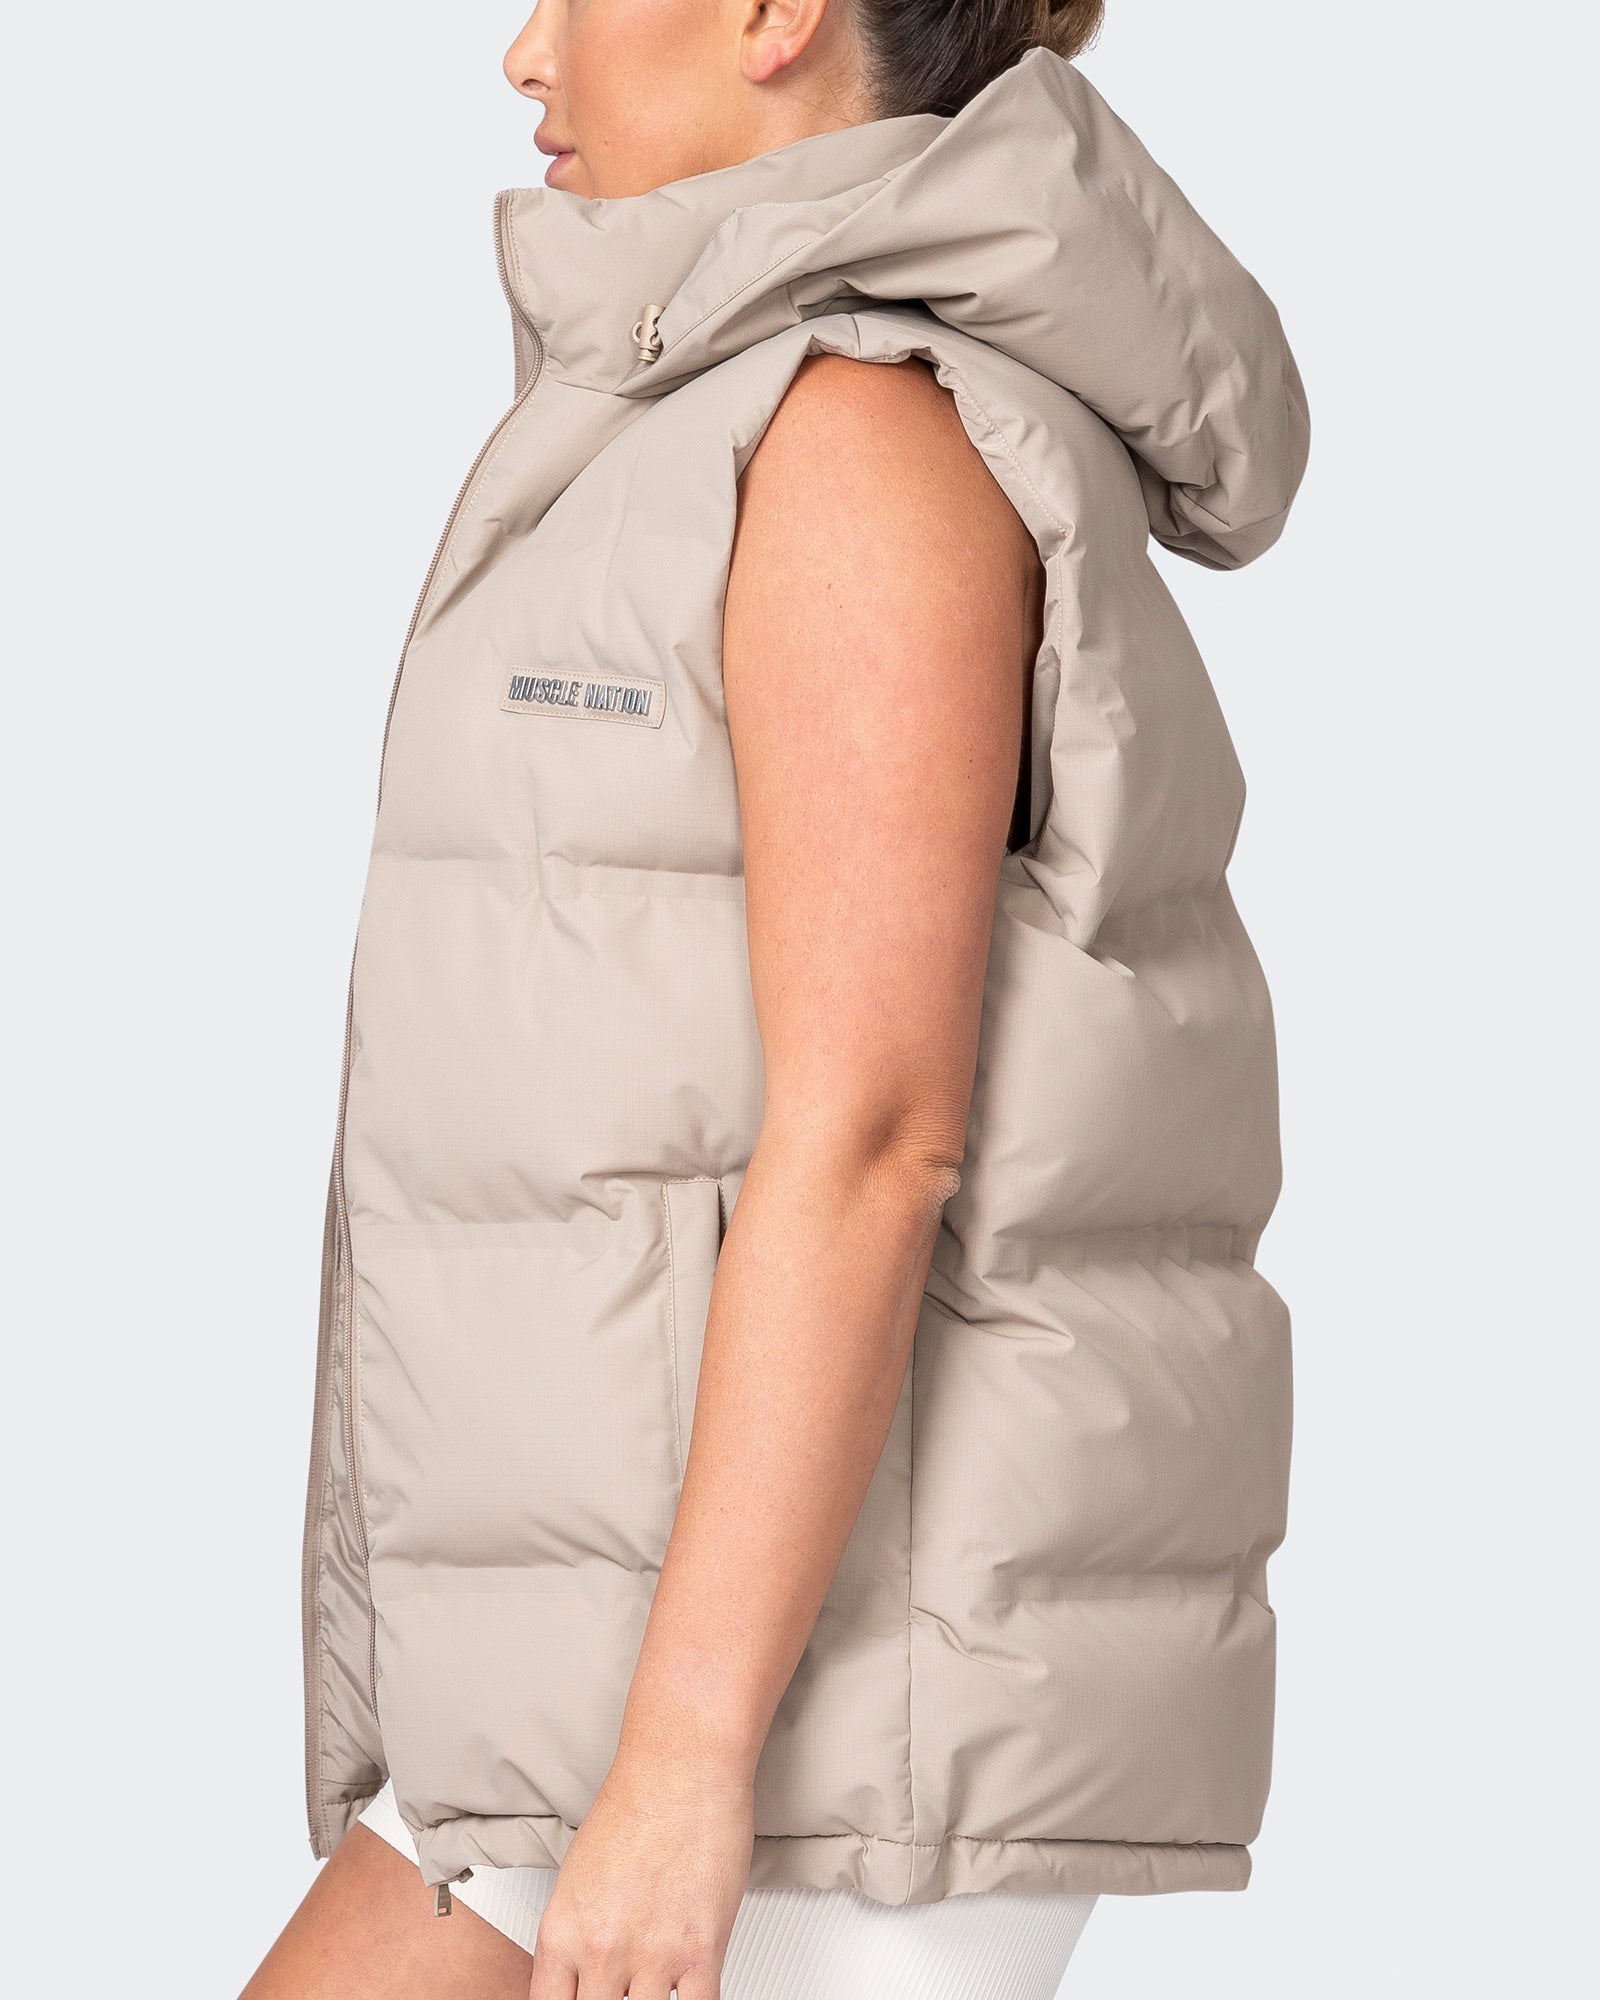 Staple Oversized Puffer Vest - Fossil - Muscle Nation